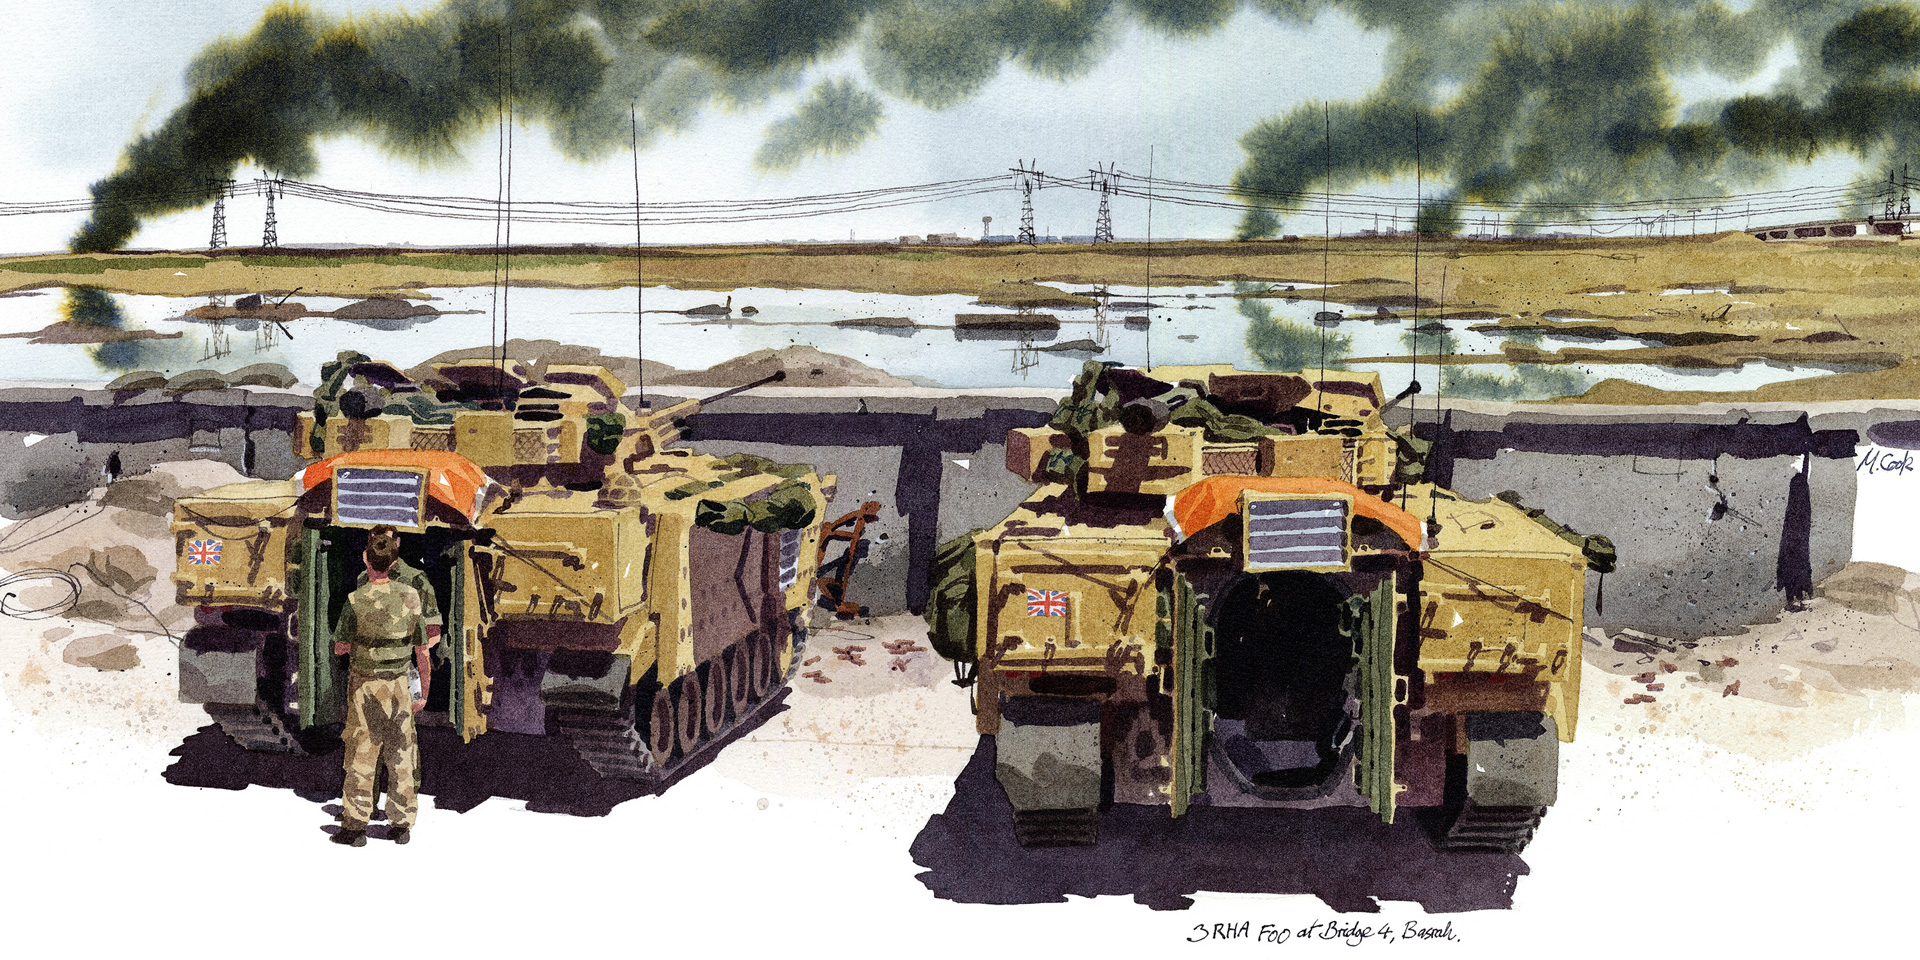 Coloured acrylic ink with pen and ink, signed middle right 'M. Cook', by Matthew Cook, 'The Times' War Artist, 2003